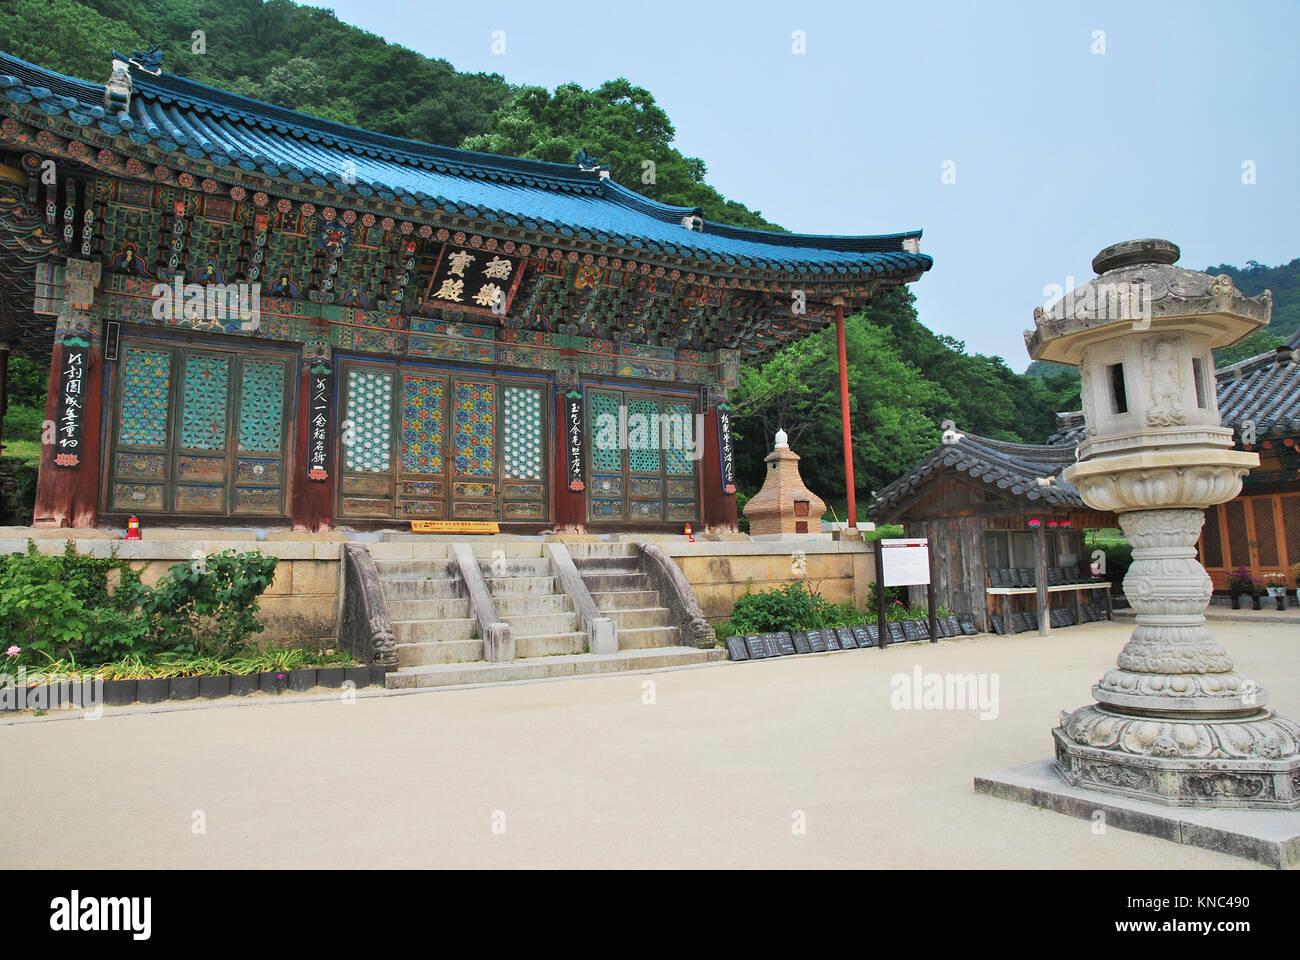 Korean-styled detailed architecture of the main building and stone lantern in the foreground. Symbol of buddhism, religio, faith, and peace. Stock Photo